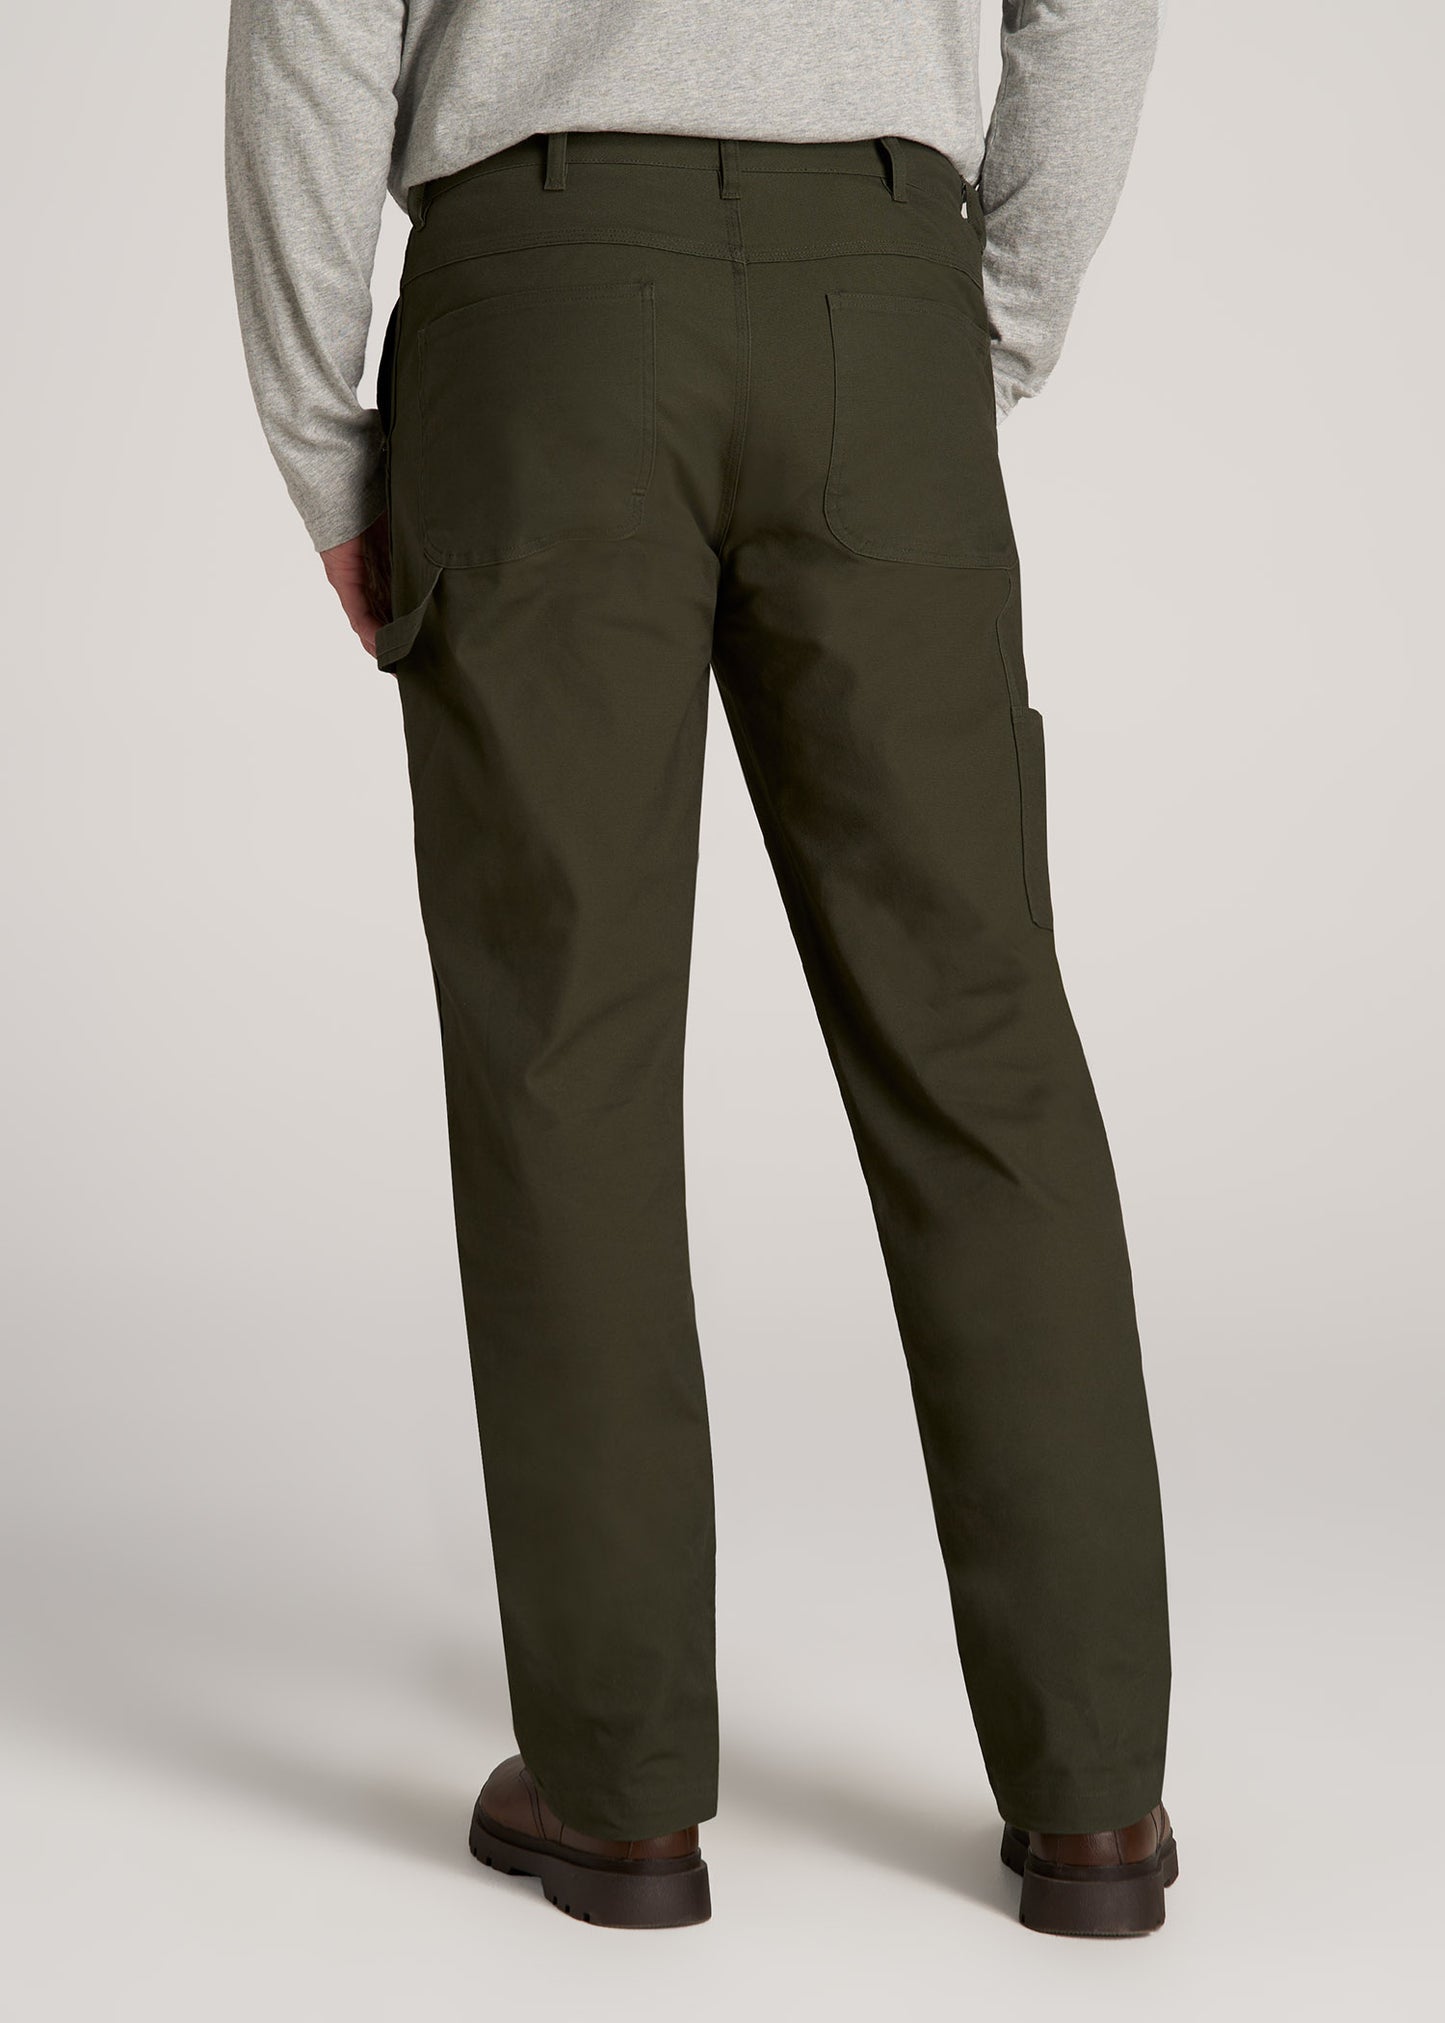 LJ&S Stretch Canvas REGULAR-FIT Carpenter's Pants for Tall Men in Thyme Green